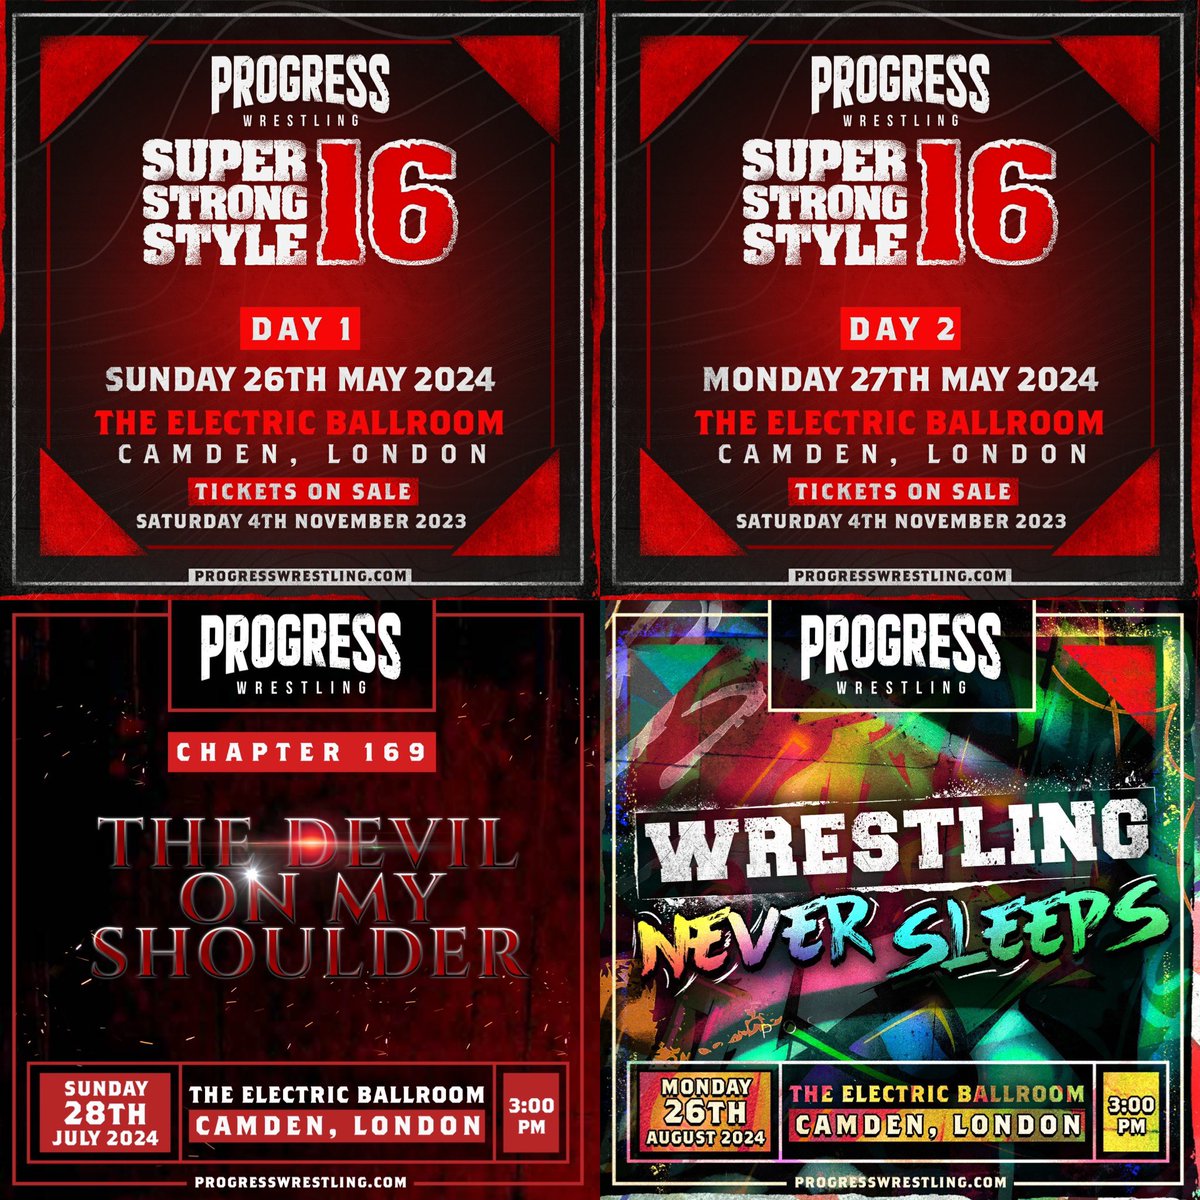 🚨 UPCOMING EVENTS 💪 Super Strong Style 16 - 26 & 27th May. Weekender & Day 1 & 2 FRONT ROW tickets have SOLD OUT! 👹 The Devil On My Shoulder - Front Row close to selling out! 👊 Wrestling Never Sleeps - FRONT ROW SOLD OUT! 🎟️ Progresswrestling.com/tickets